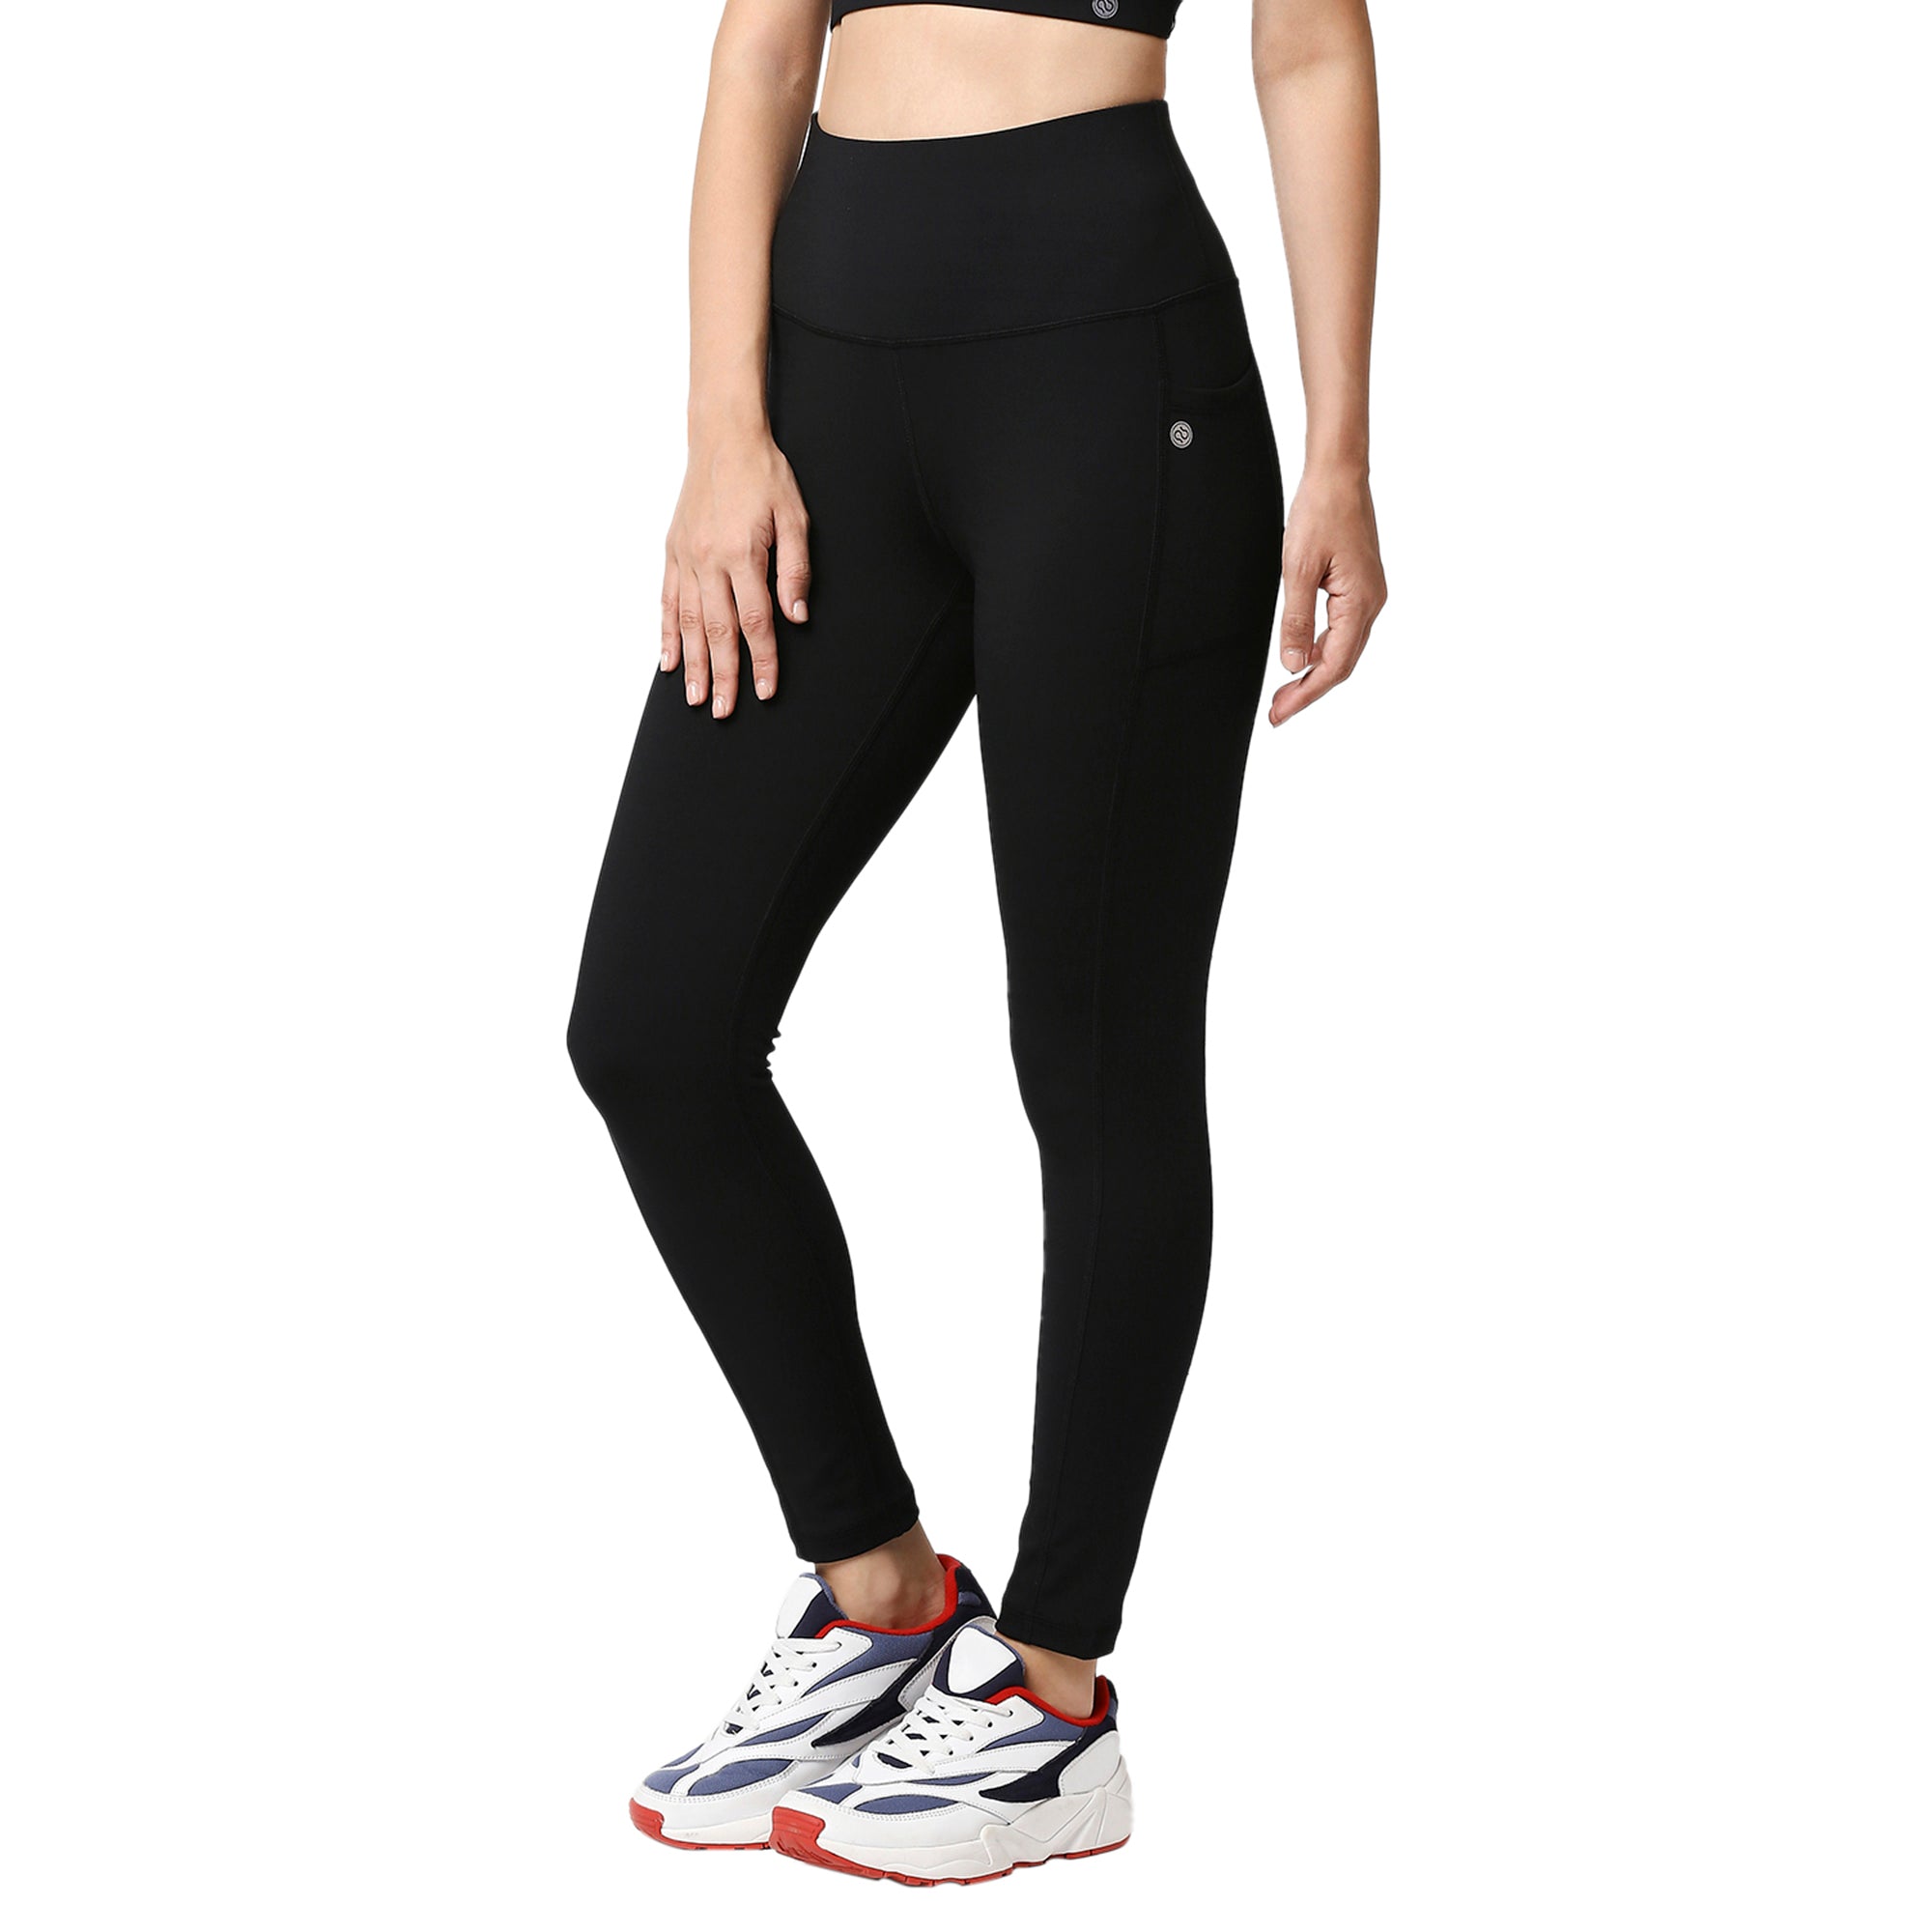 Set of Medium Impact Racerback Sports Bra and High Waist Ankle Length Sports Leggings With Pockets SET AT-1 AT-2